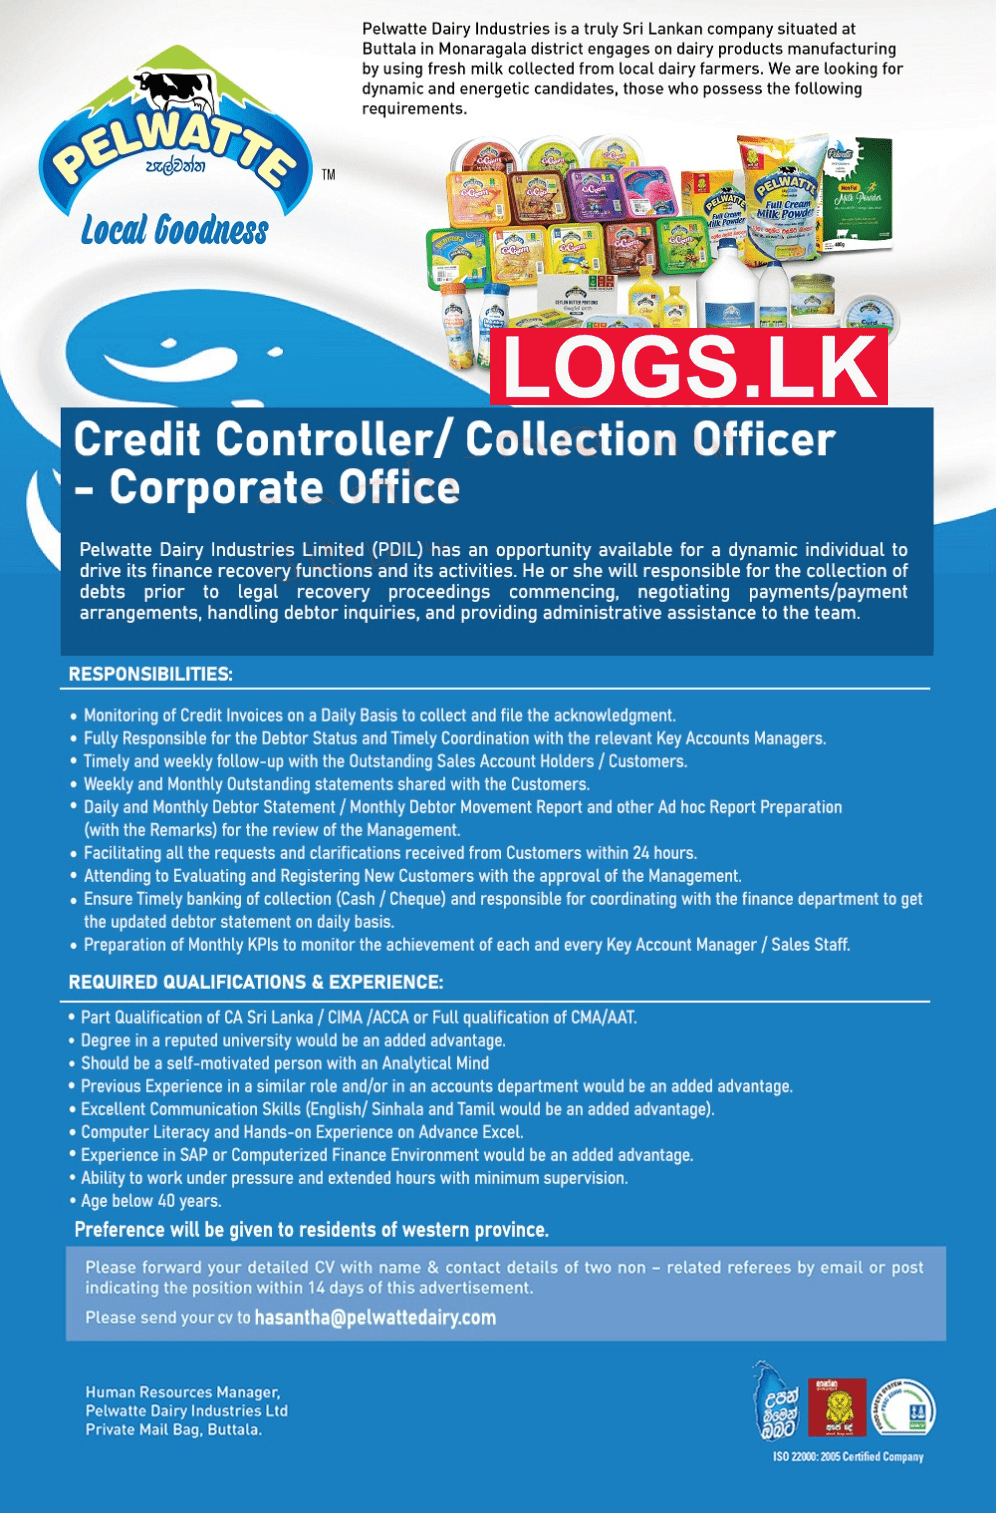 Credit Controller / Collection Officer Vacancy at Pelwatte Dairy Industries Job Vacancies